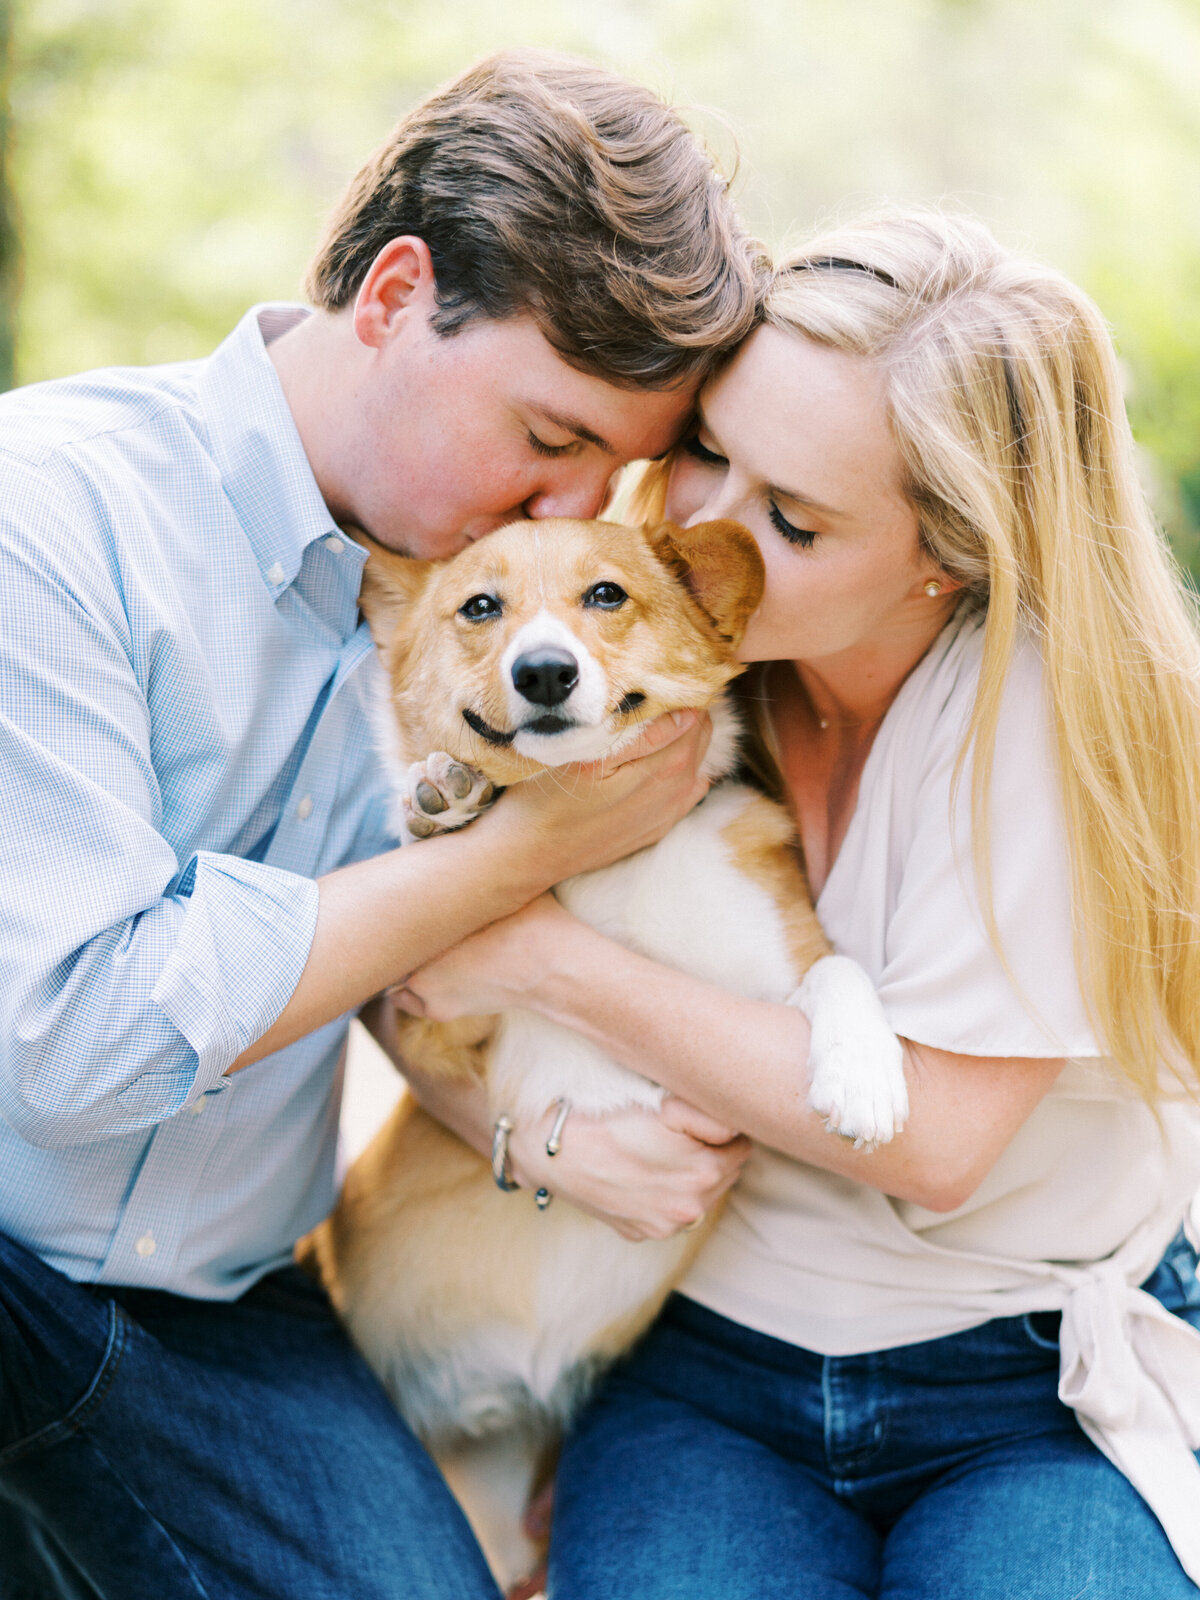 Man and woman in jeans holding and kissing their Corgi dog